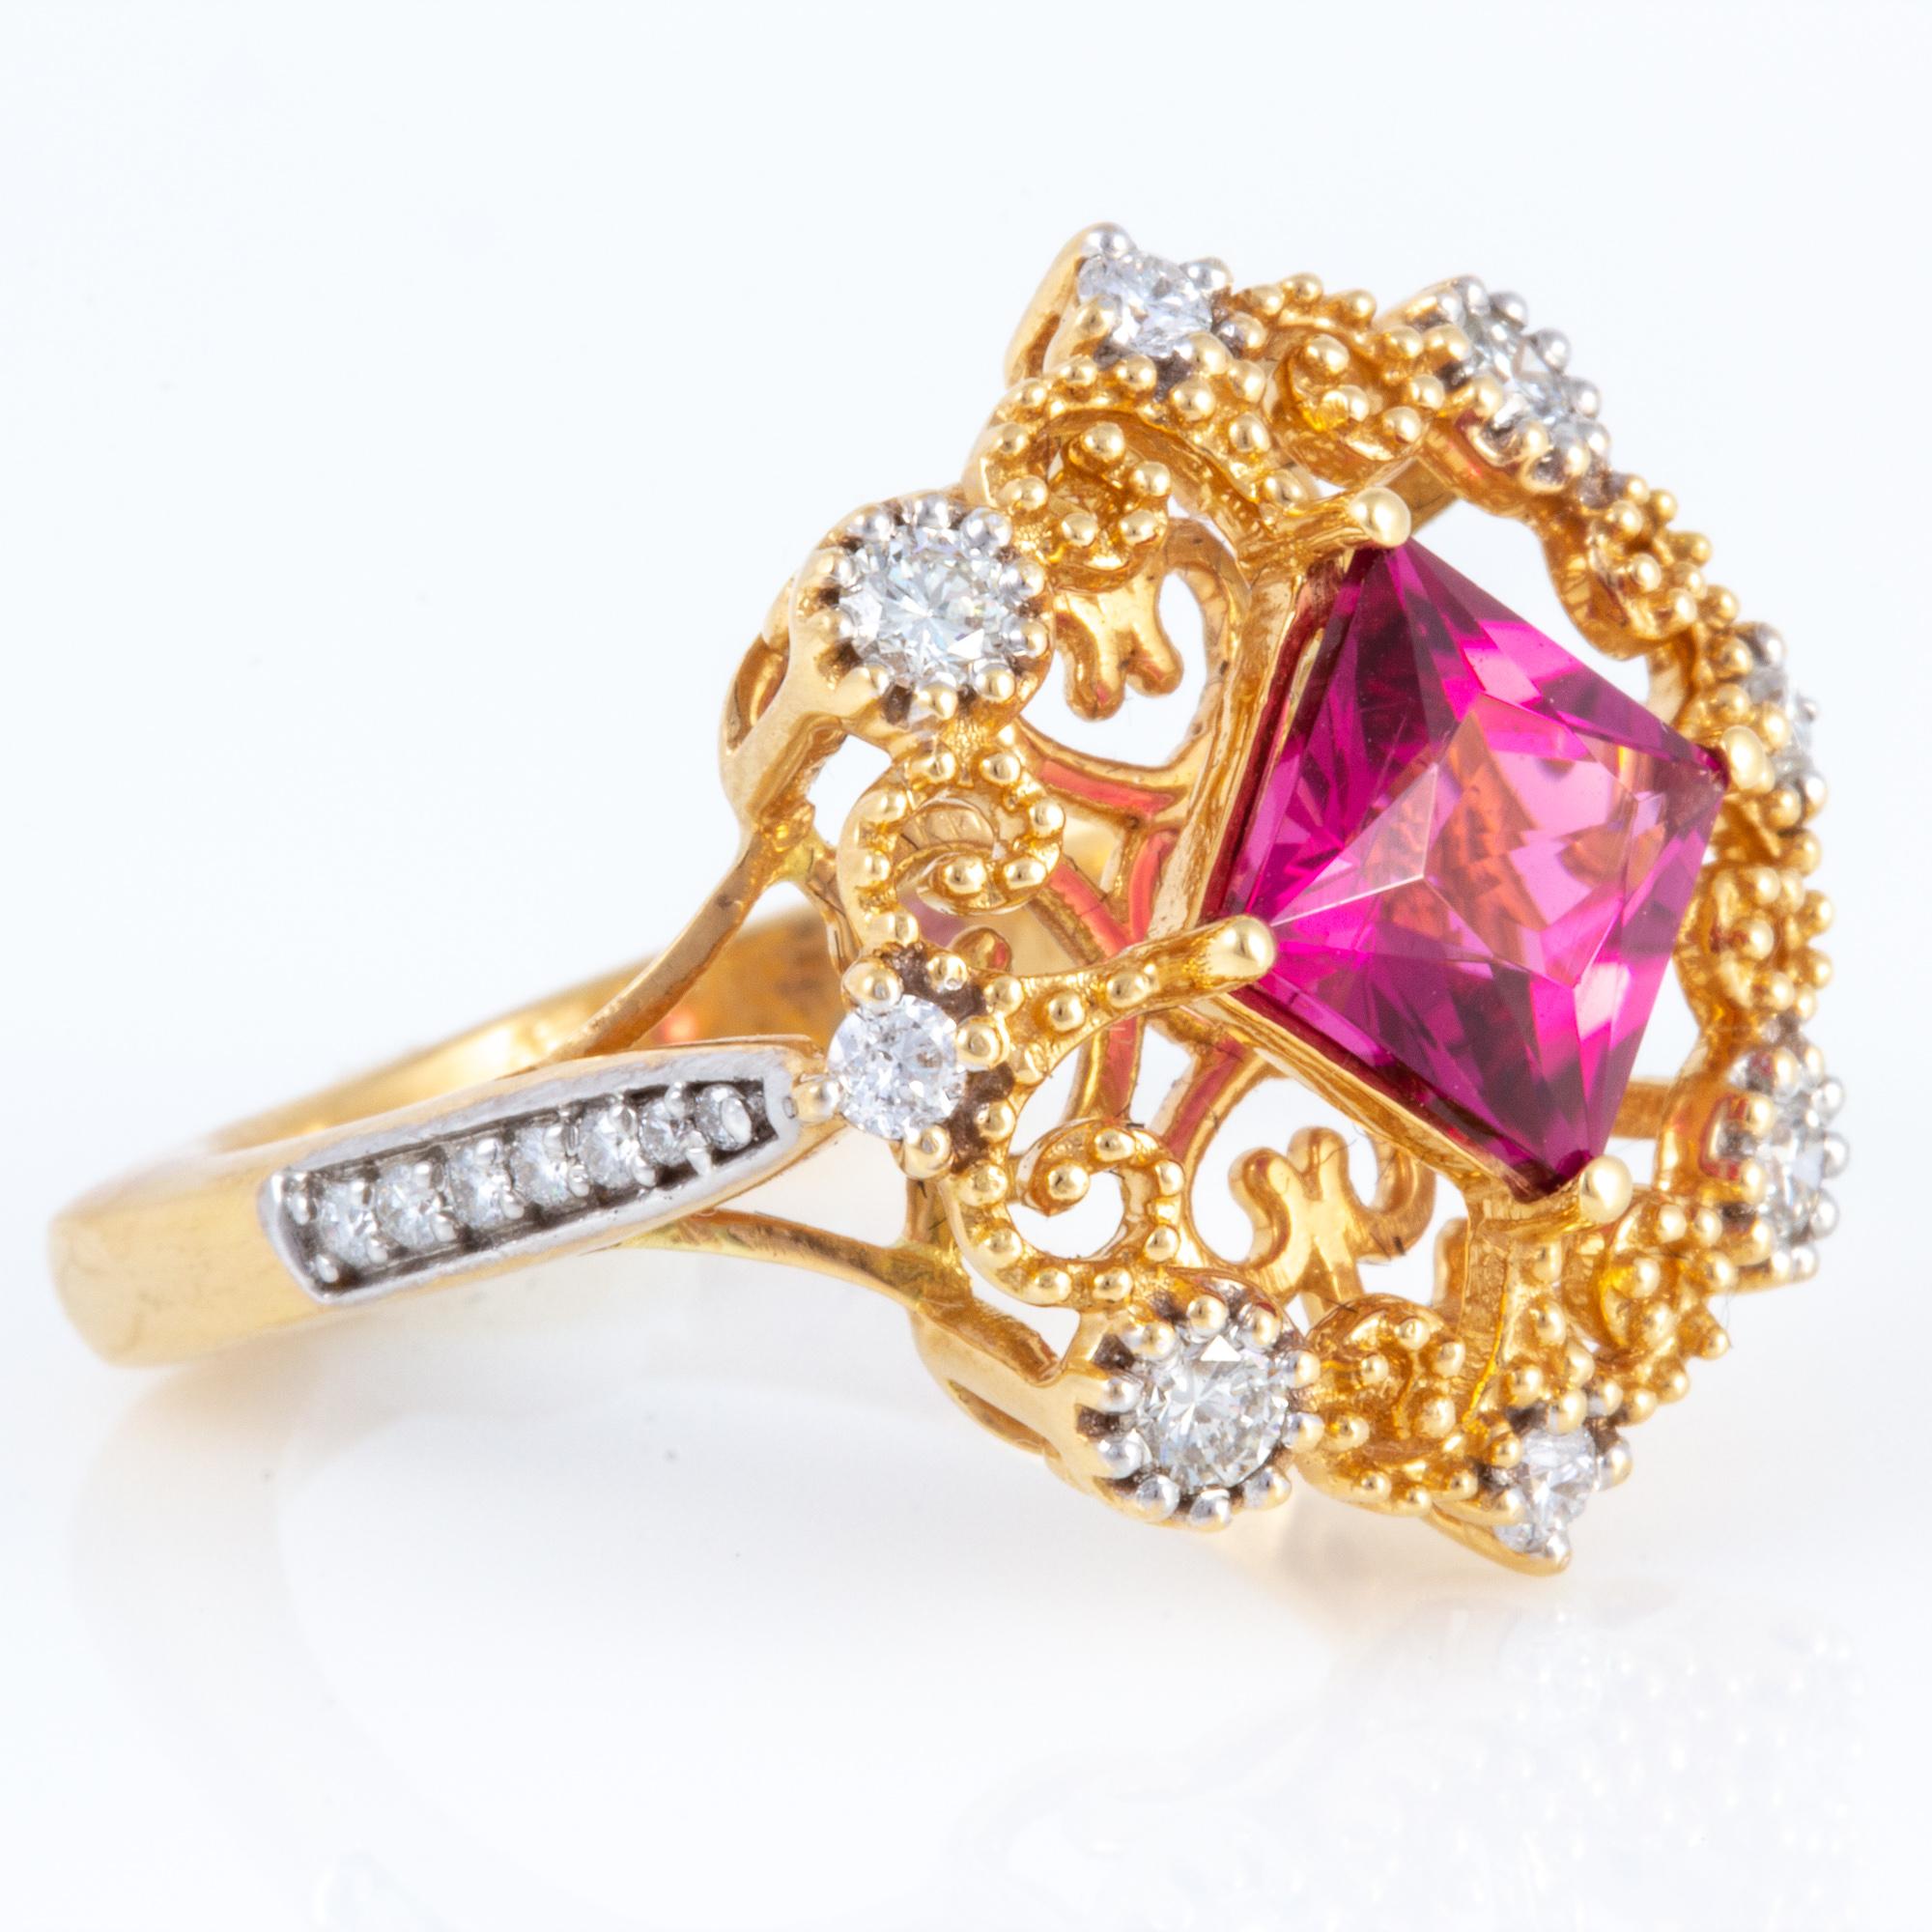 Rubellite Tourmaline and Diamond Ring set in 18 kt Gold For Sale 9